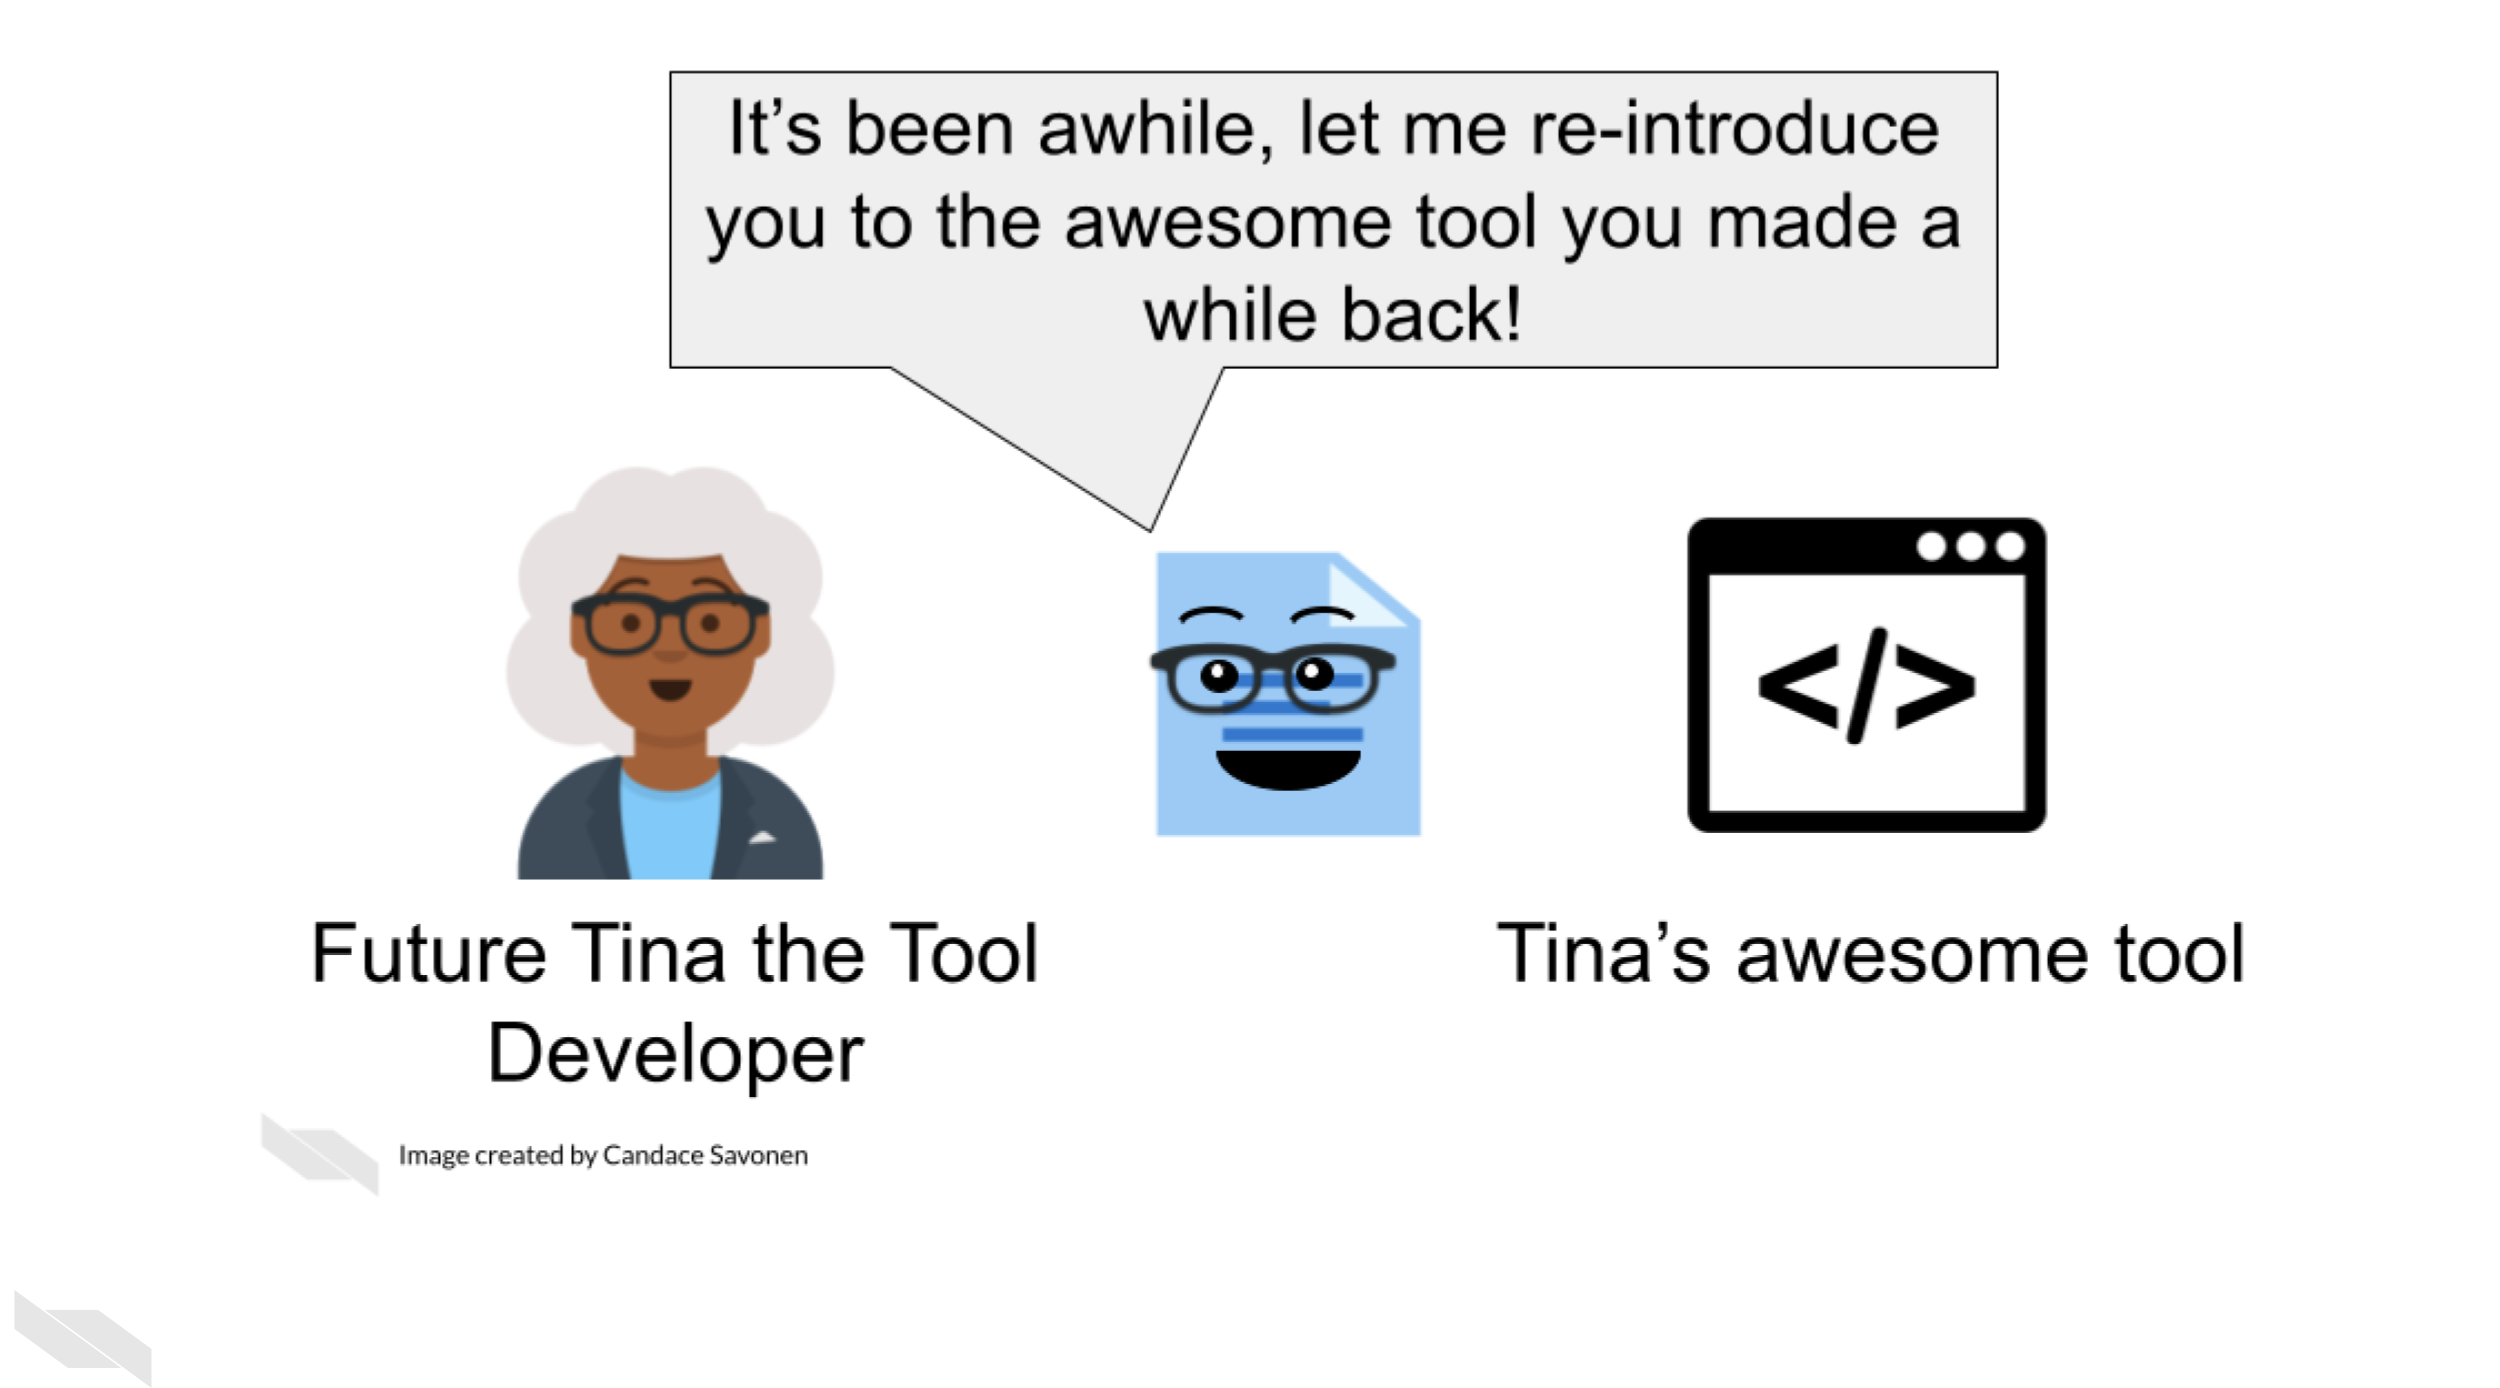 Future Tina the Tool Developer now has gray hair and Tina’s awesome documentation is between Tina and Tina’s awesome tool. The documentation says It’s been awhile, let me re-introduce you to the awesome tool you made a while back!